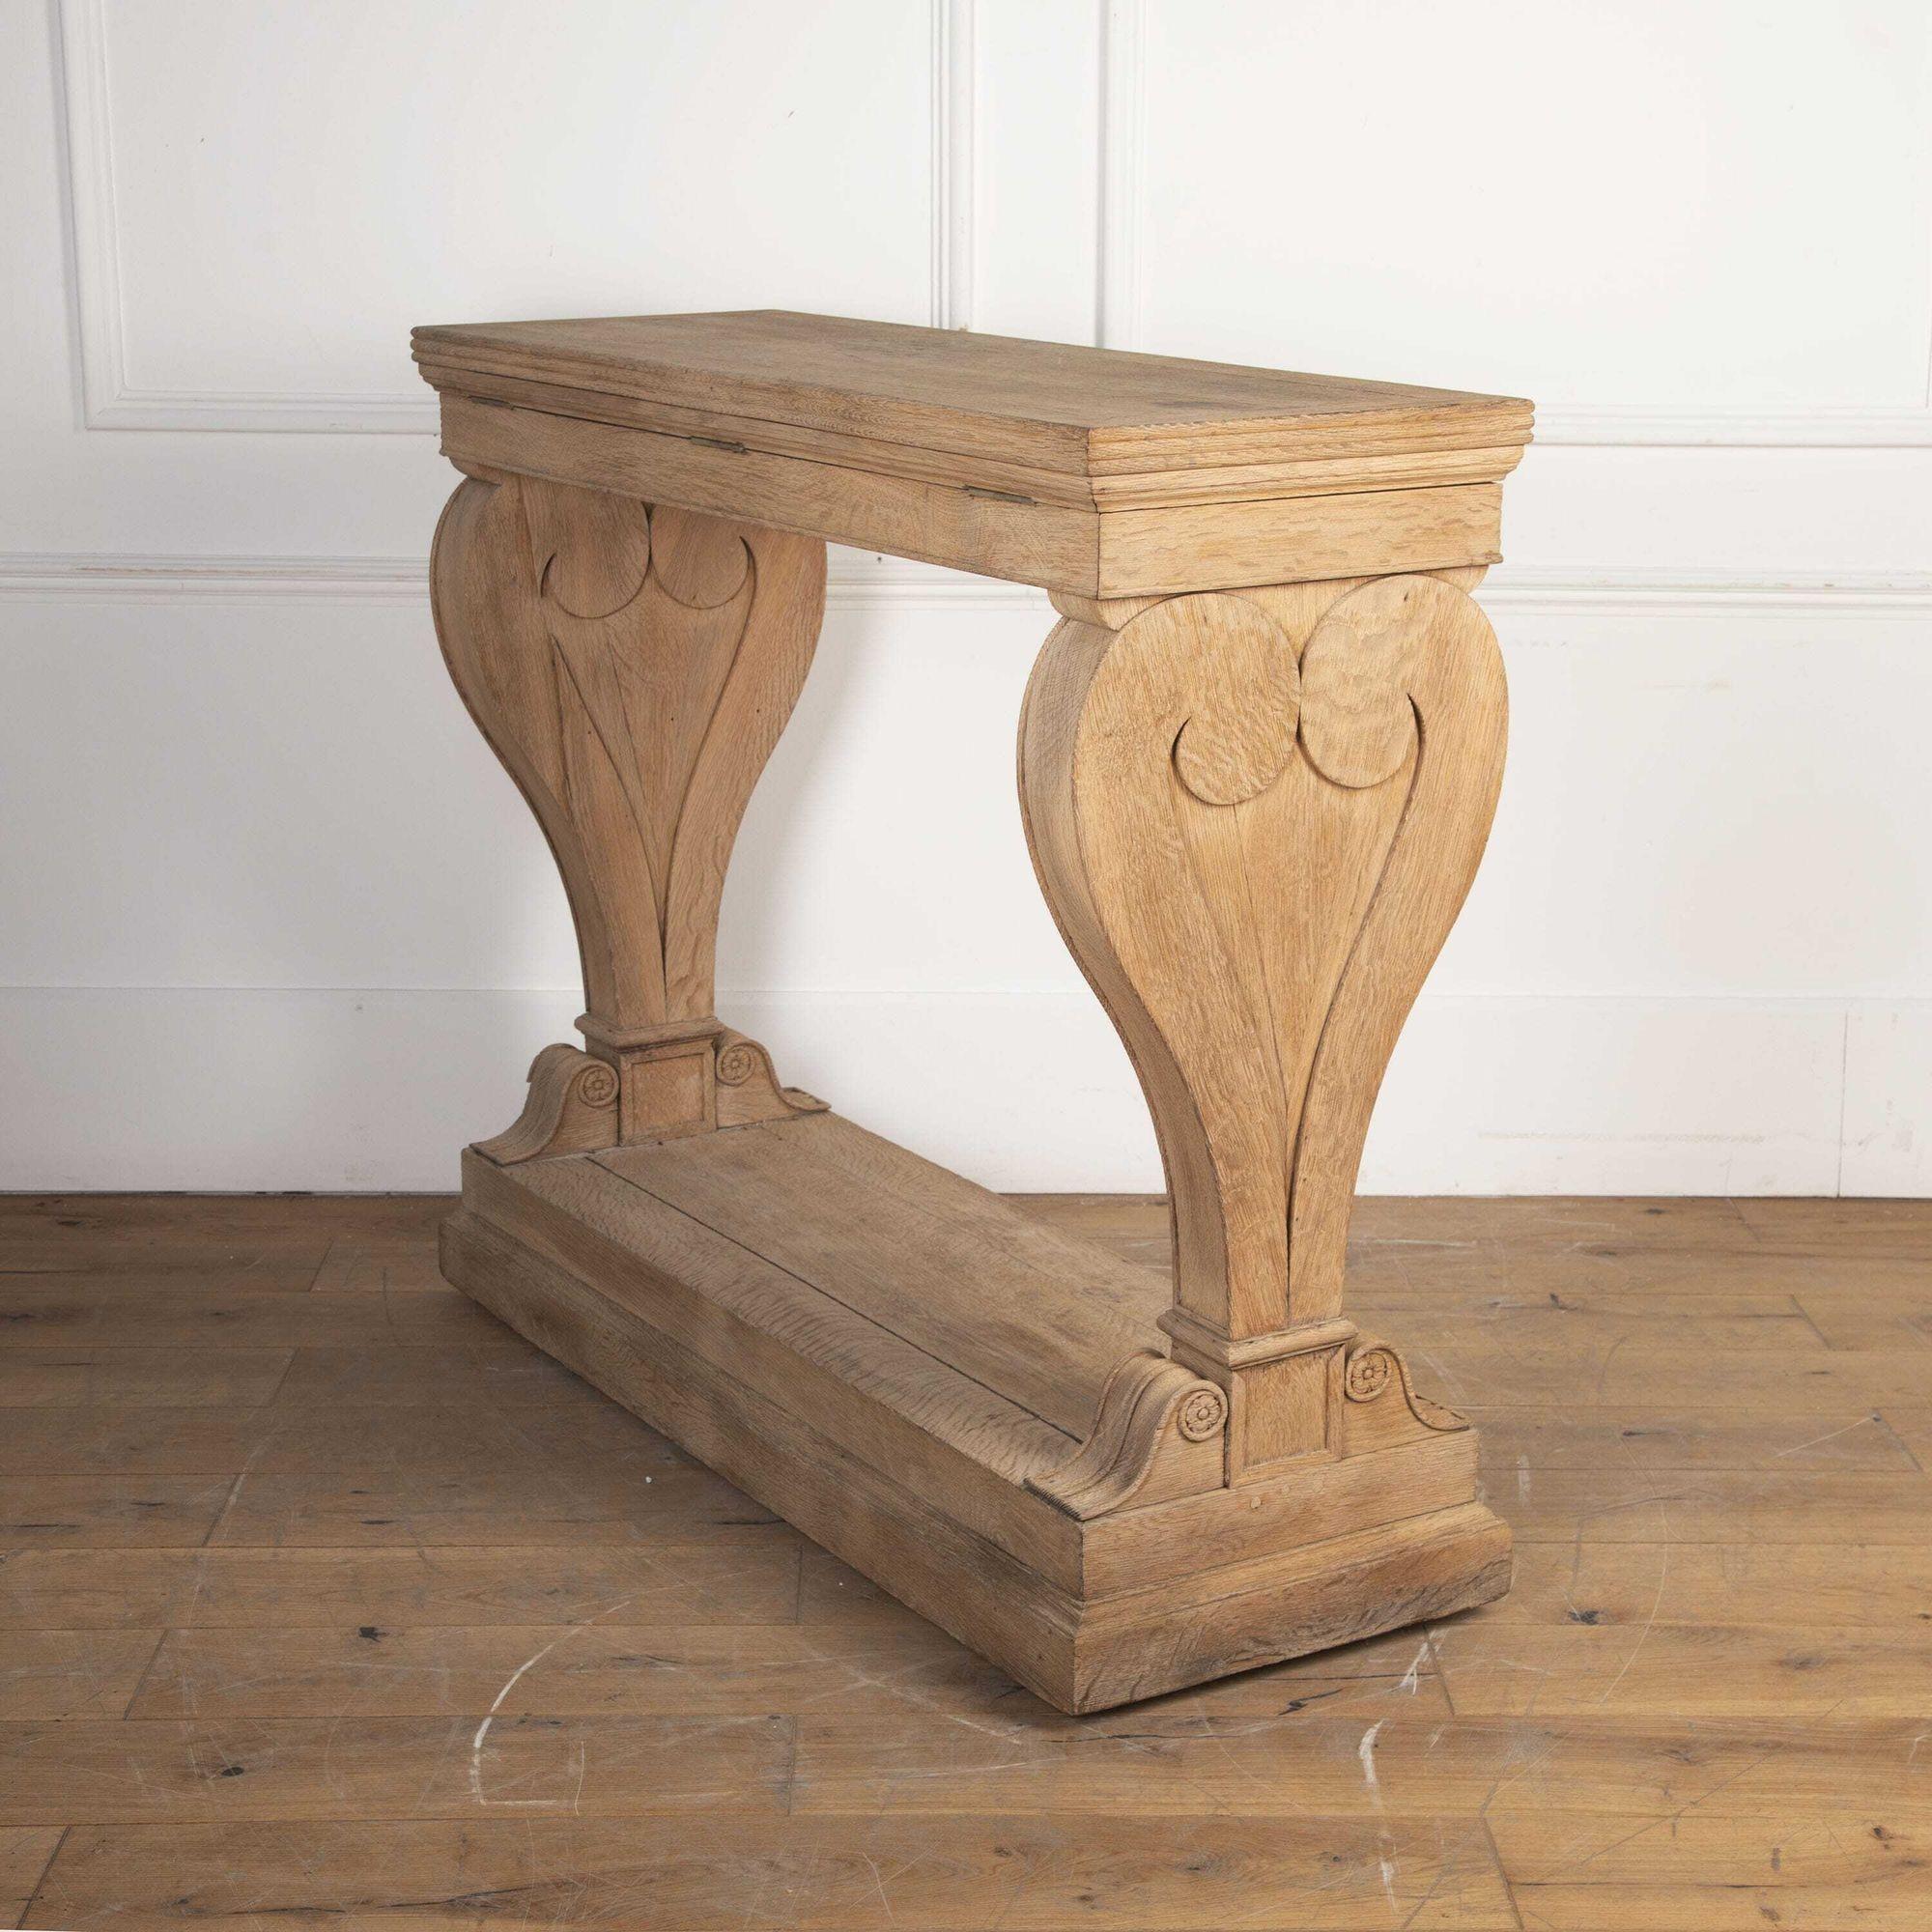 Early 19th century Empire console table.
Solid hand-carved bleached oak, a superb statement piece for an entrance hall or reception room.
The top is hinged to reveal an unusual hidden compartment, the use of which is now lost to history!.